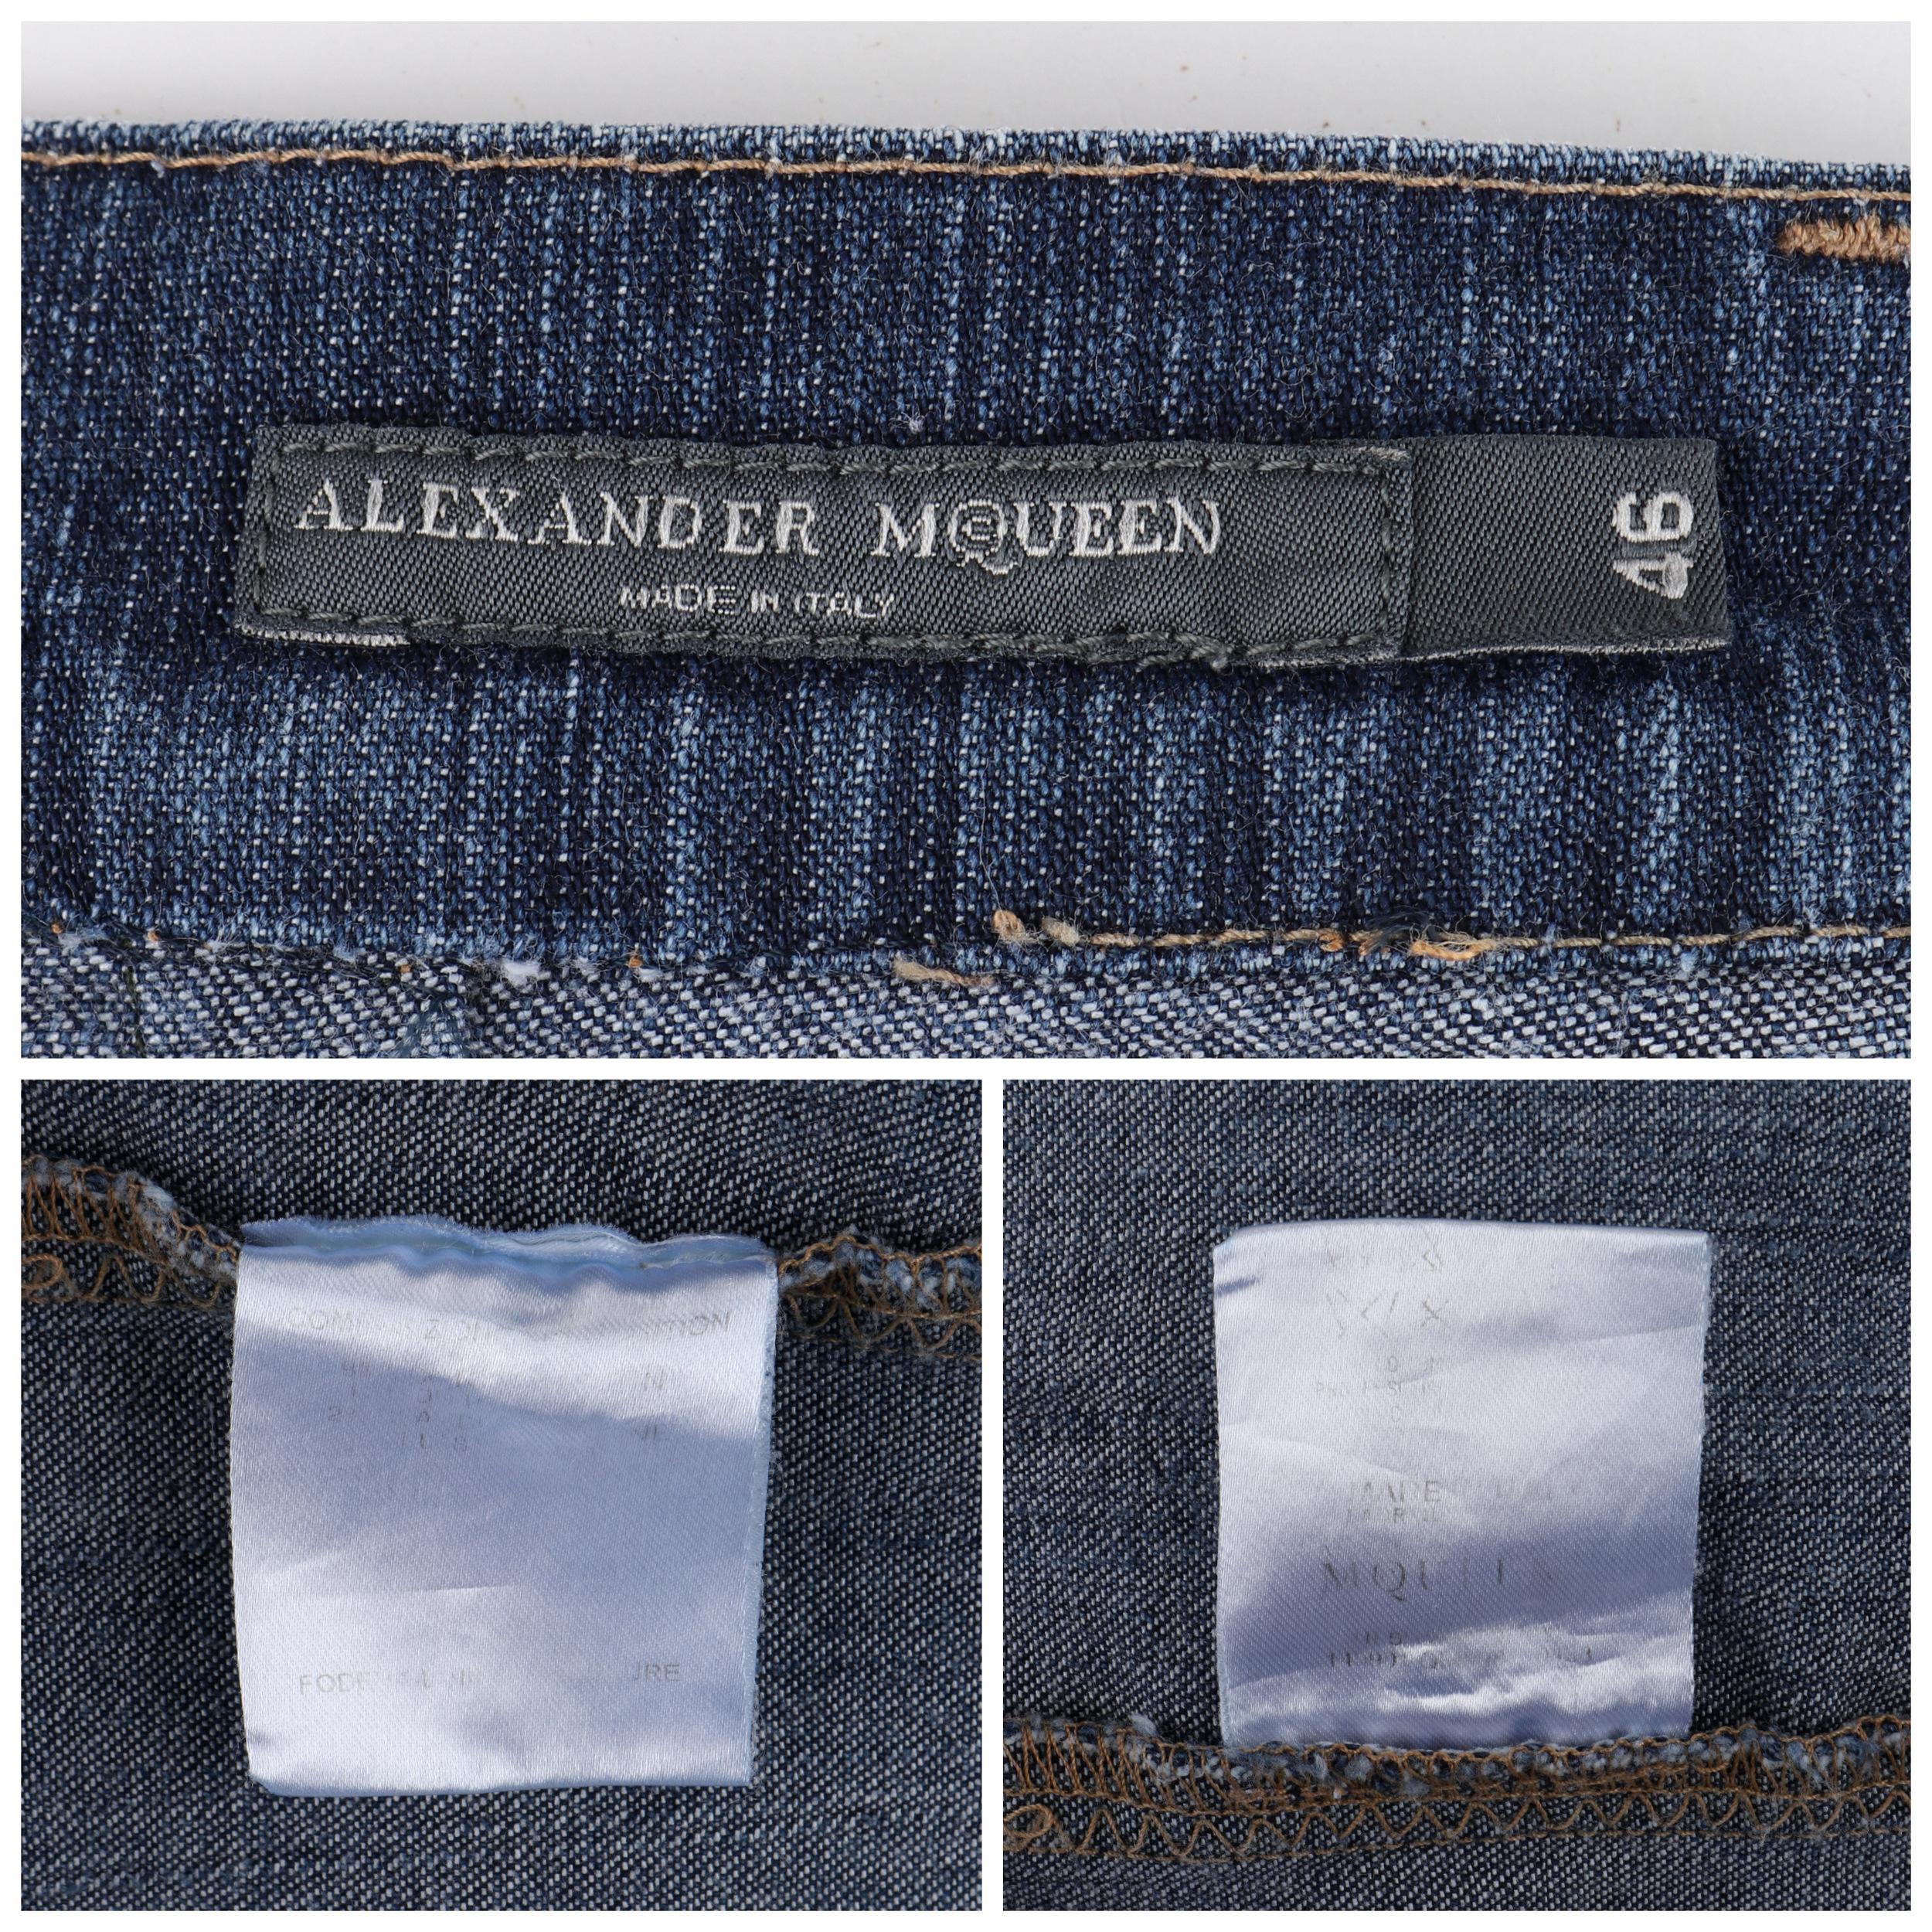 ALEXANDER McQUEEN A/H 2005 - « The Man Who Knew Too Much » - Jean droit taille basse en vente 2